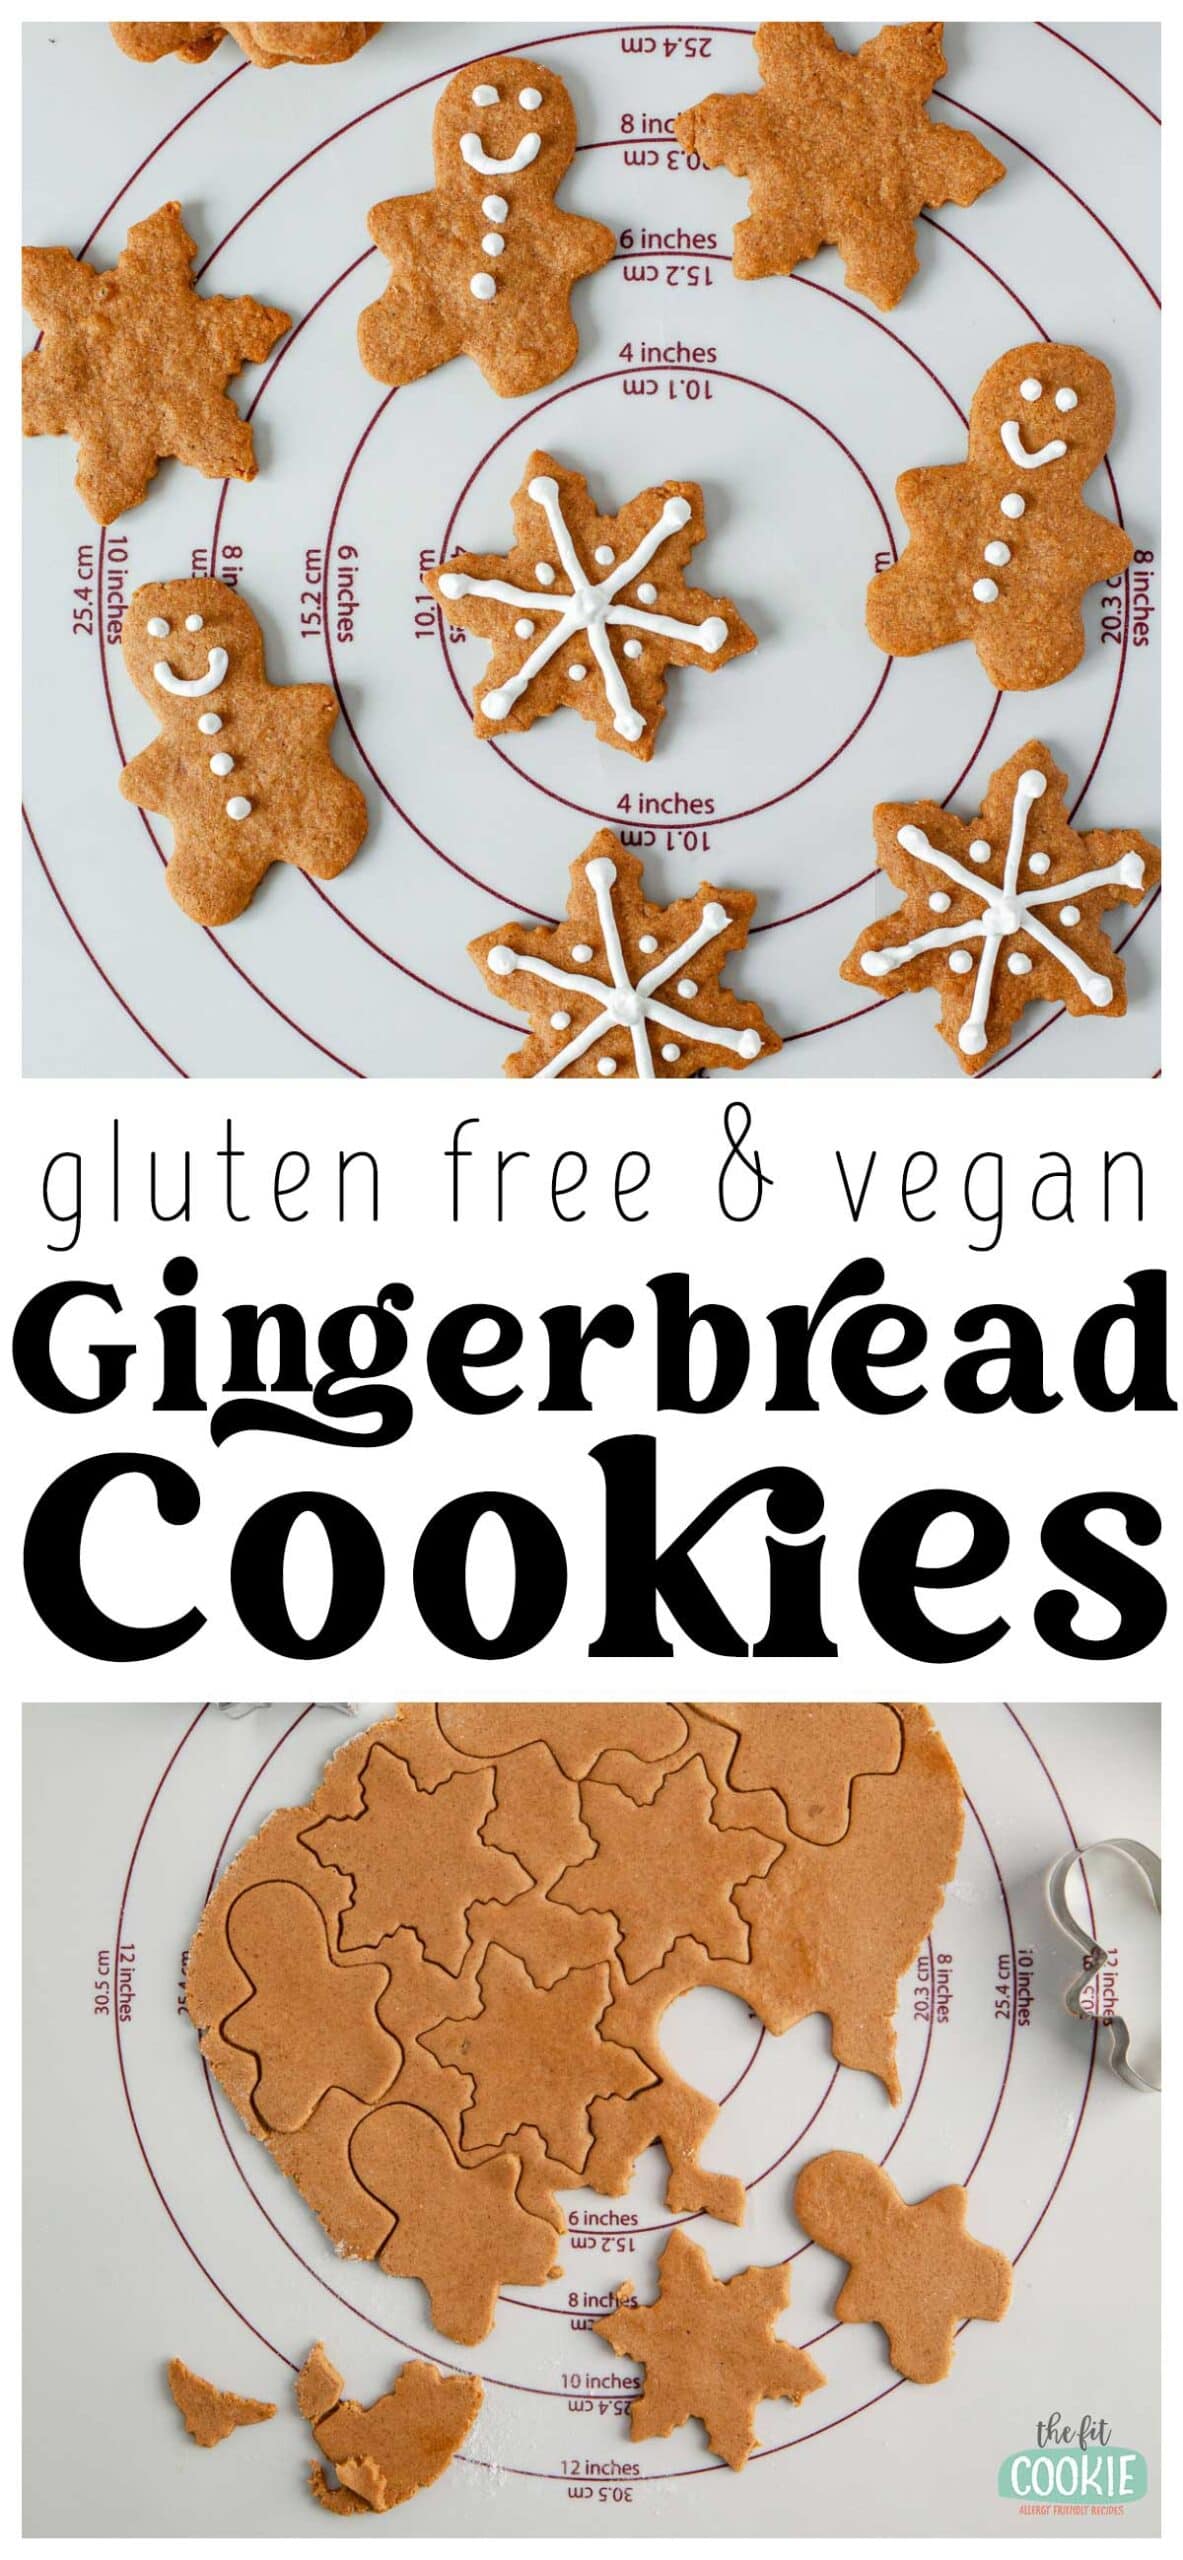 photo collage of gluten free gingerbread cookie photos and text